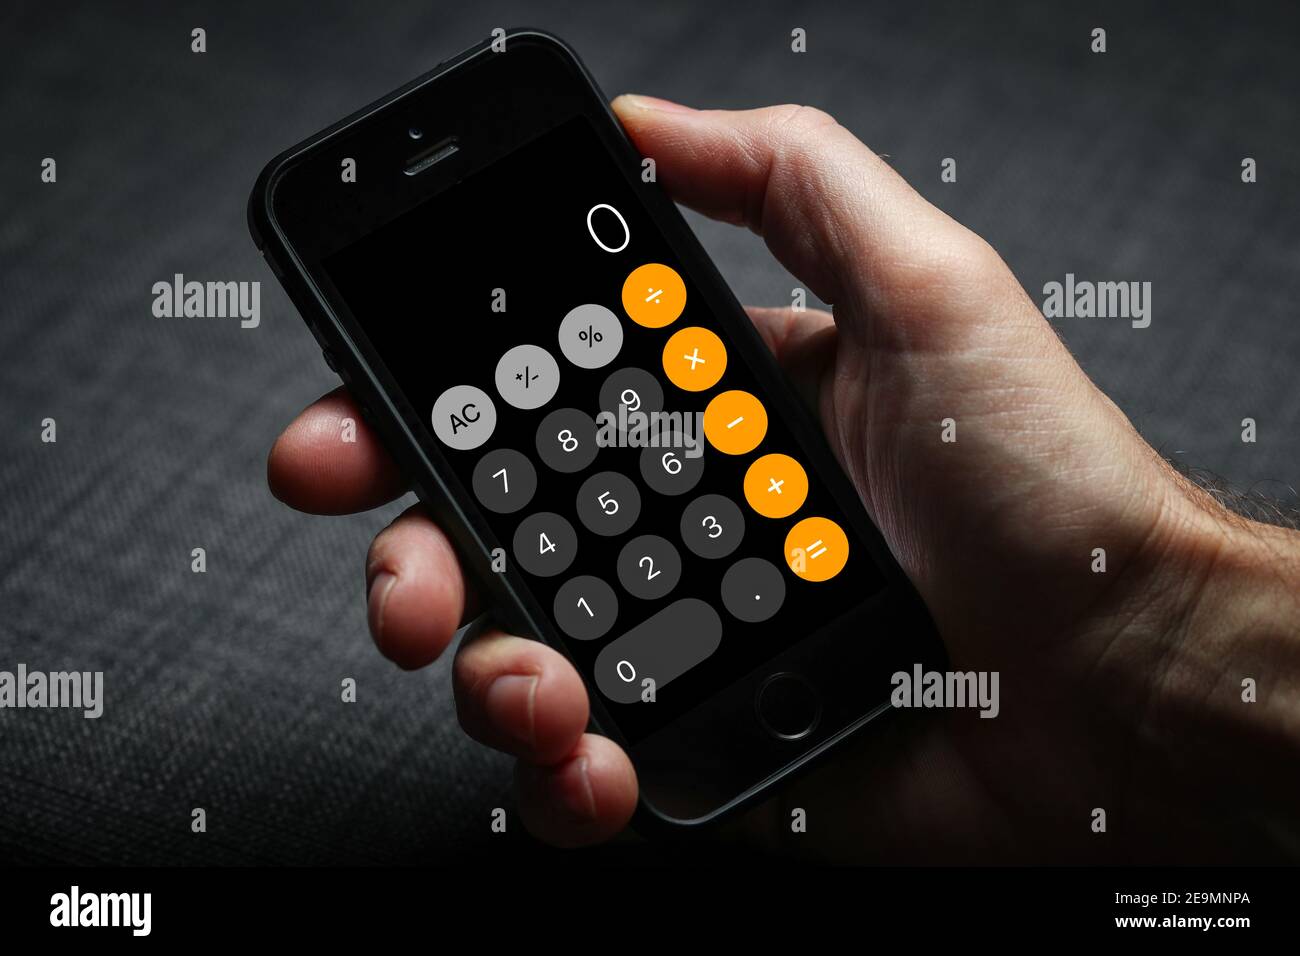 a man using the iPhone calculator on his iPhone Stock Photo